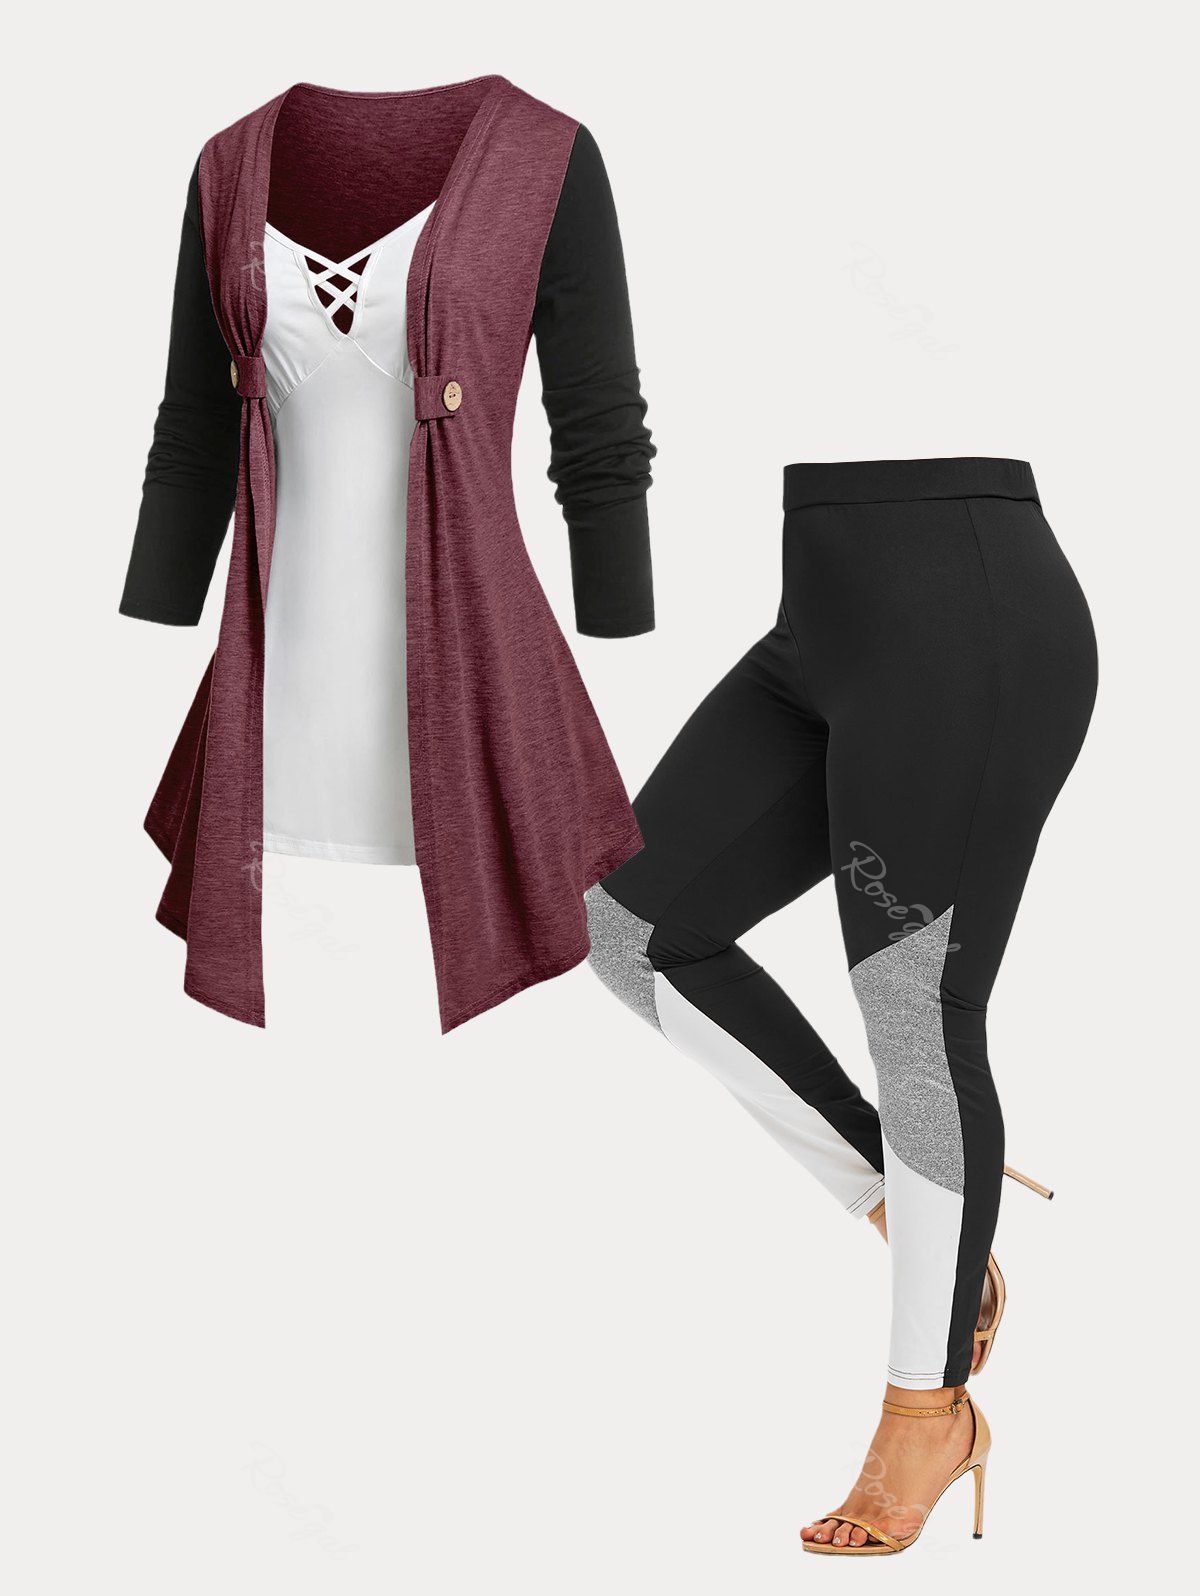 Fancy Eye-catching Colorblock 2 In 1 Top and Leggings Plus Size Outfit  